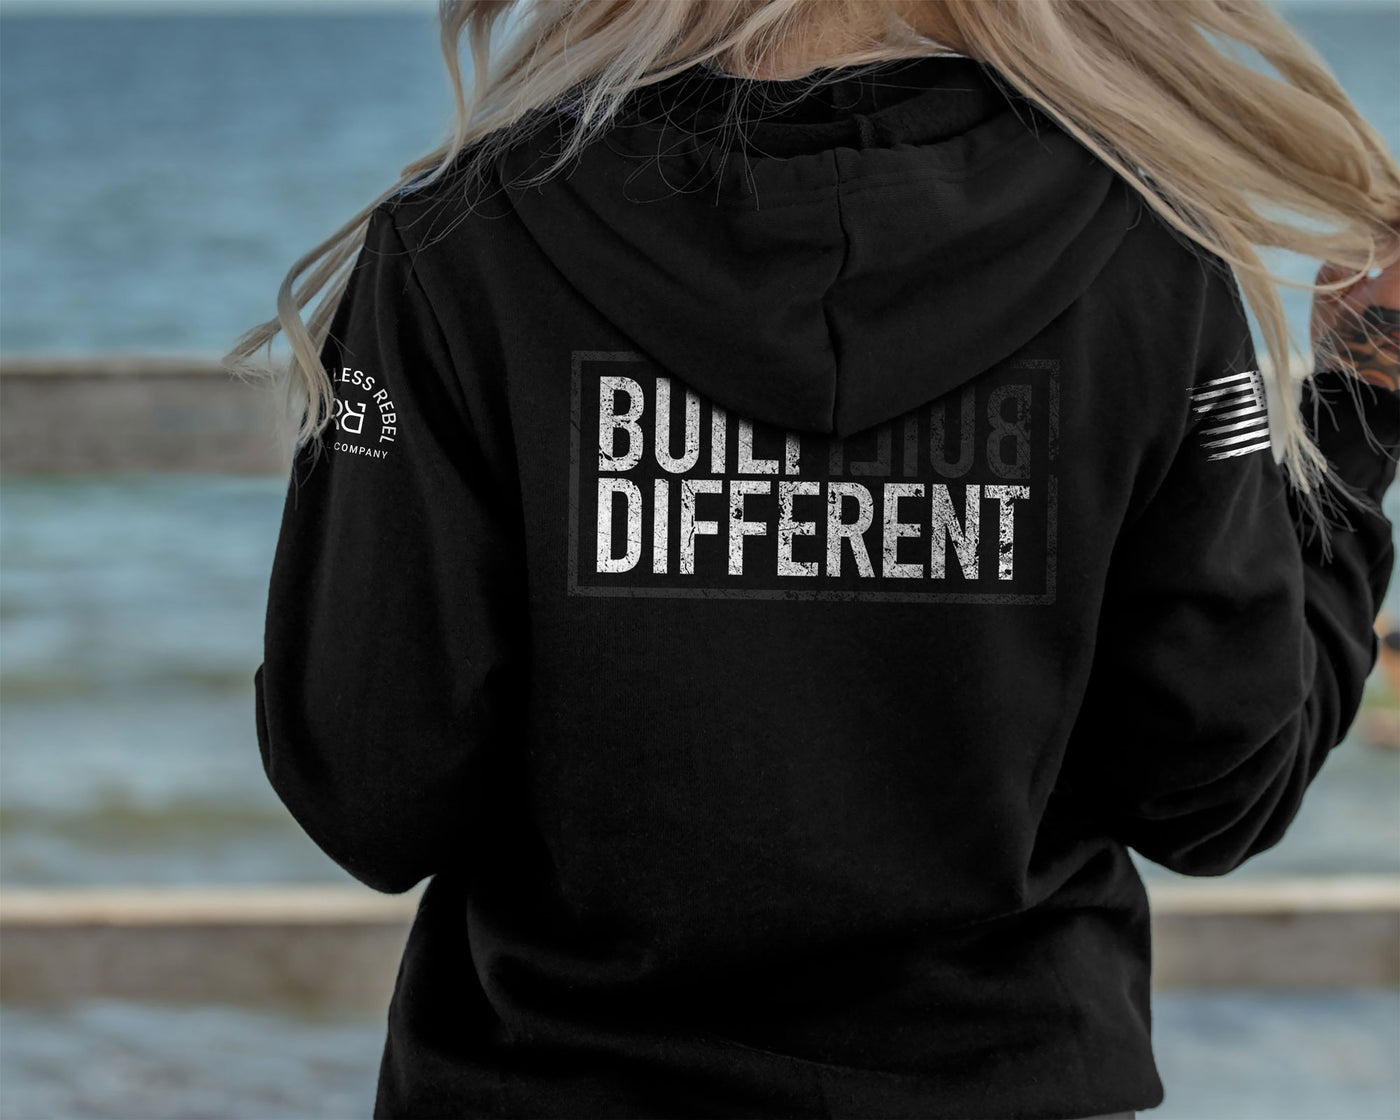 Woman wearing Solid Black Women's Built Different back design hoodie